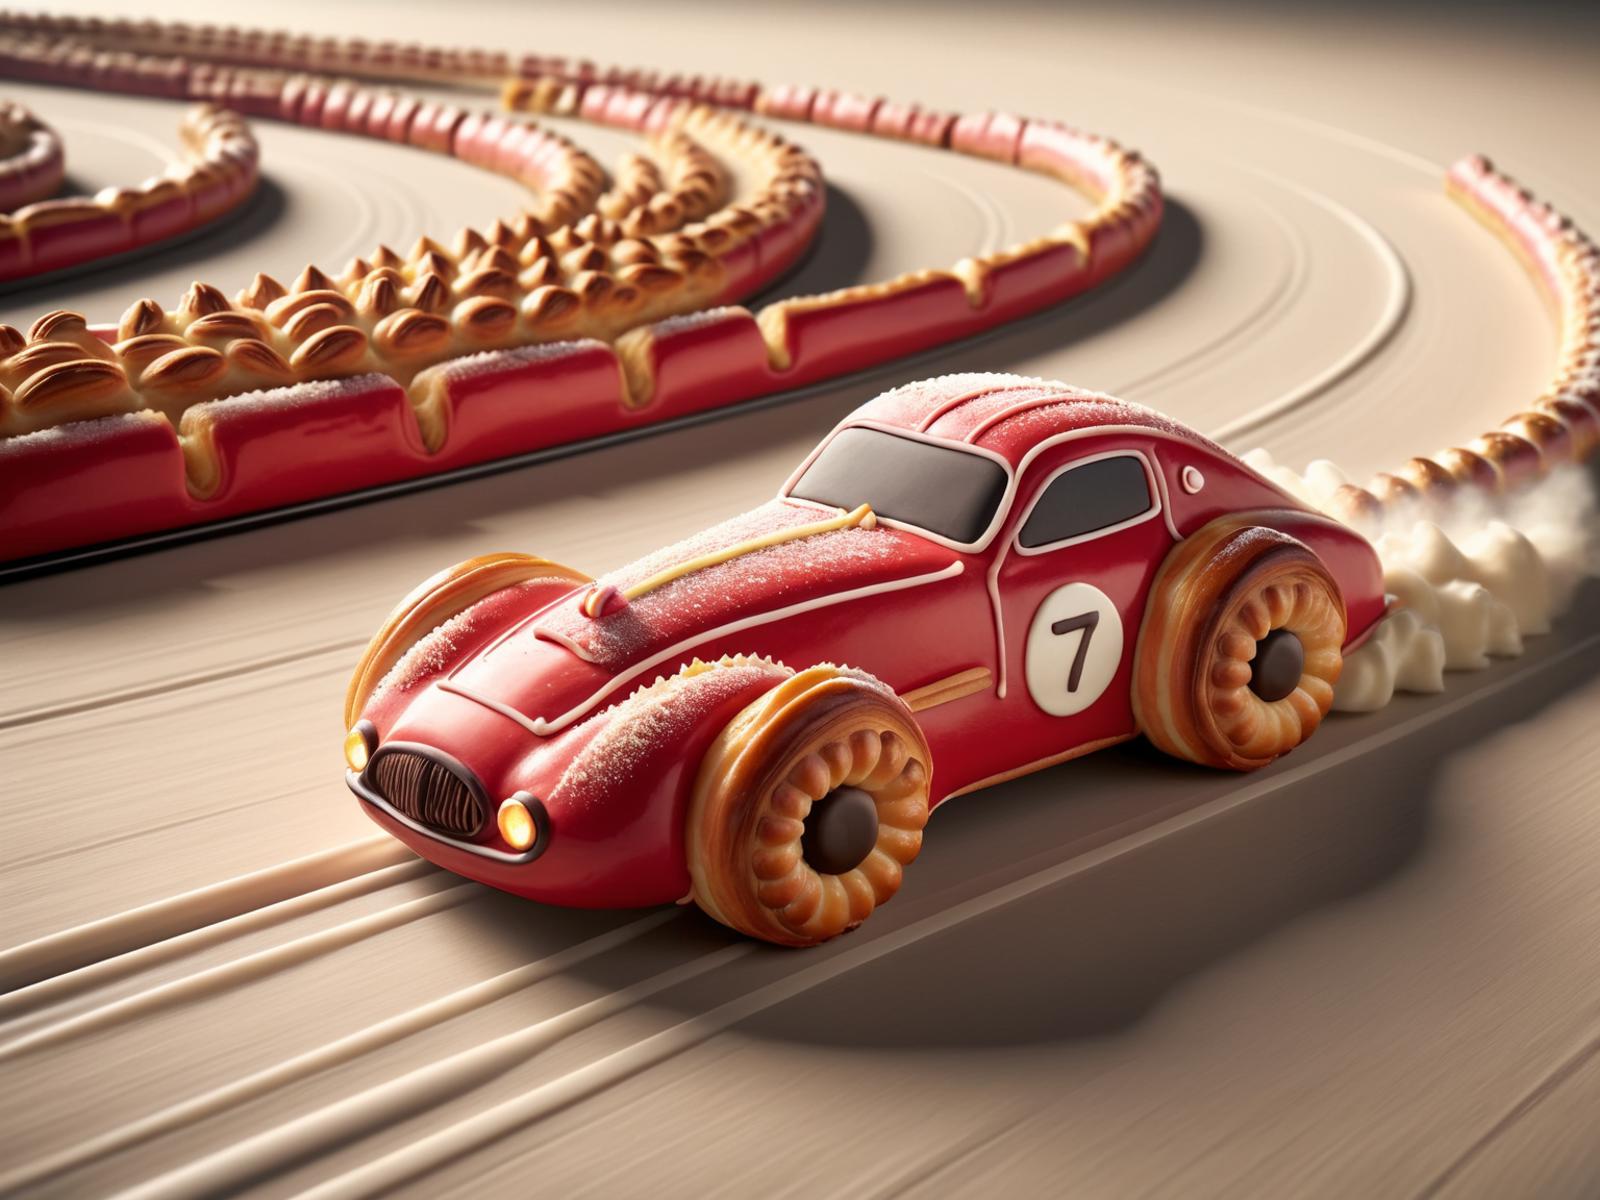 A Red Cake Car on a Race Track with a 7 on its Side.